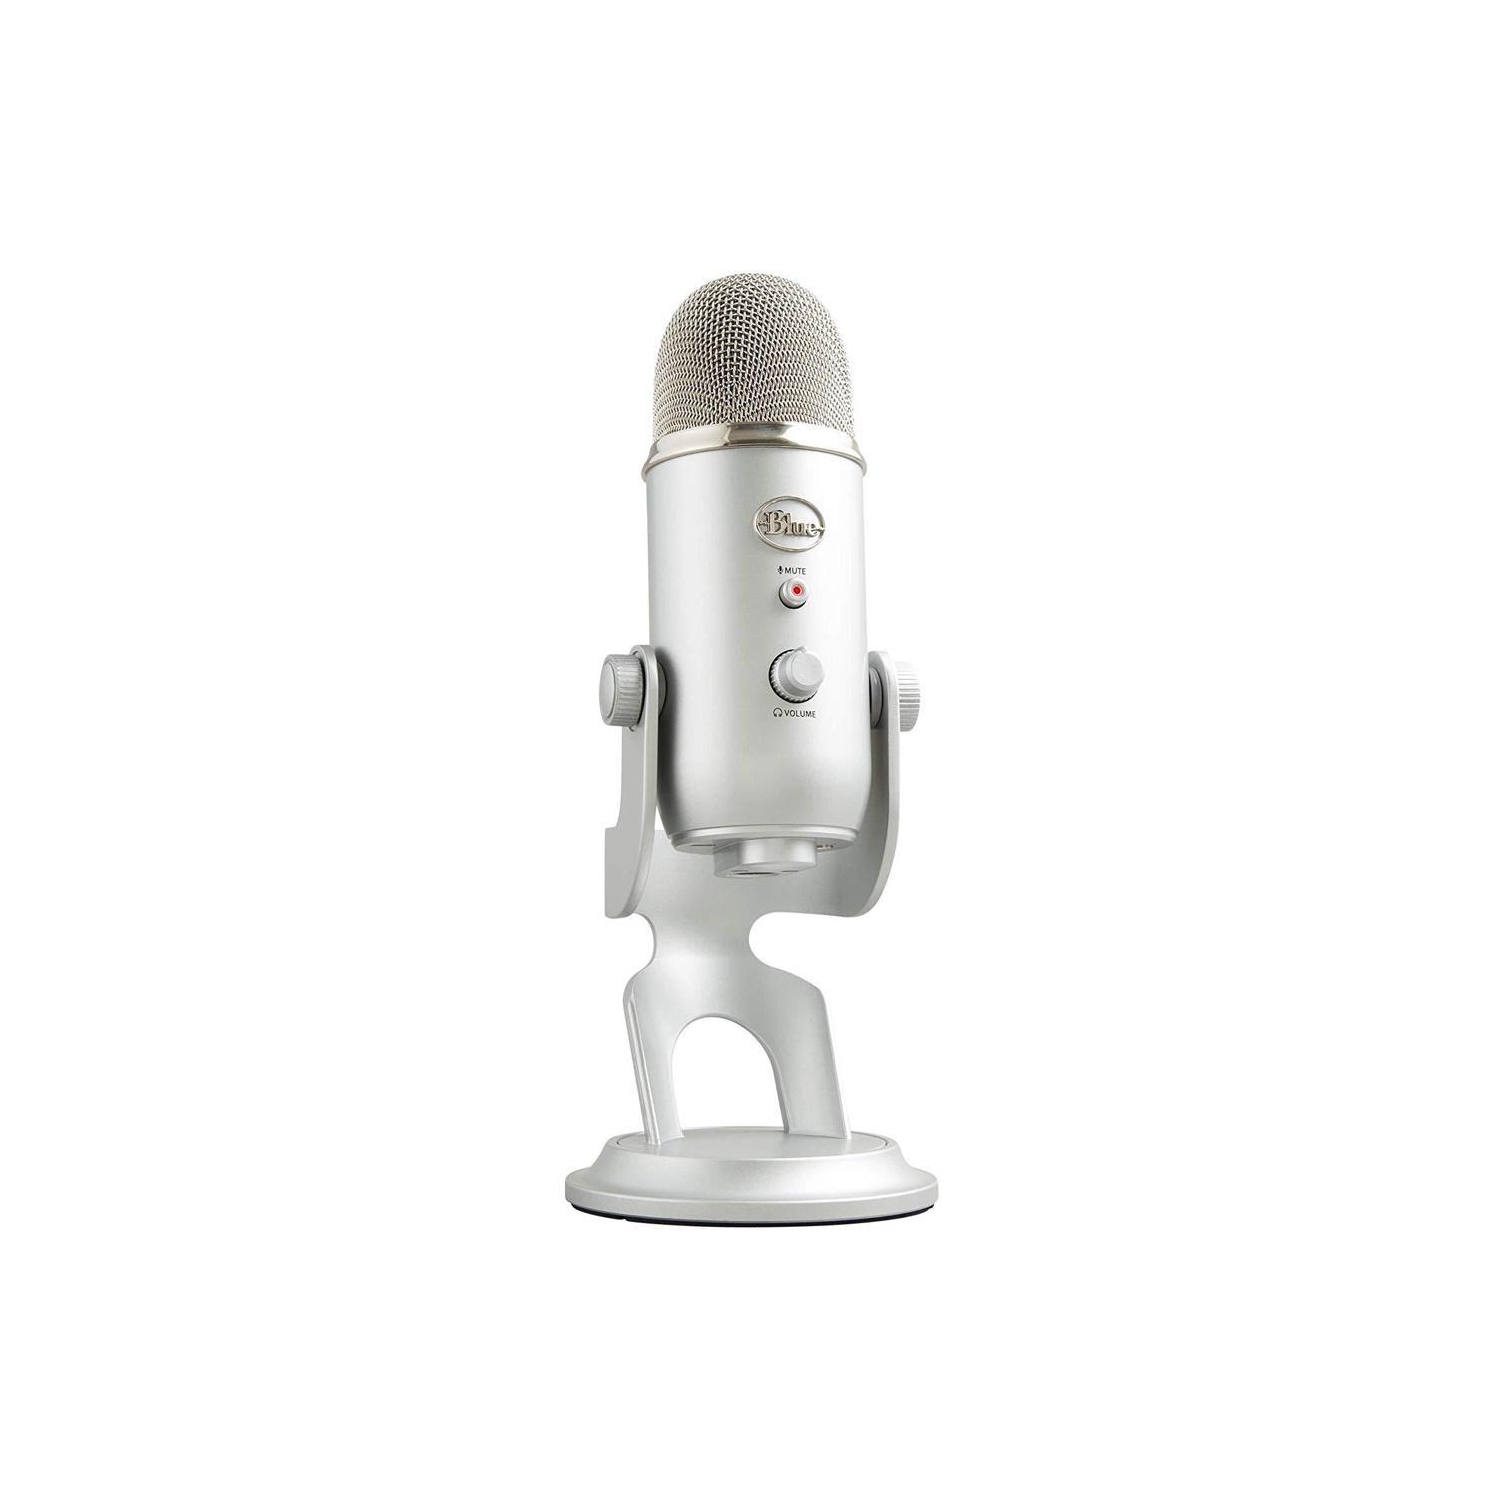 USB MICROPHONE BLUE Yeti Silver Edition, Mic Only (988-000103)